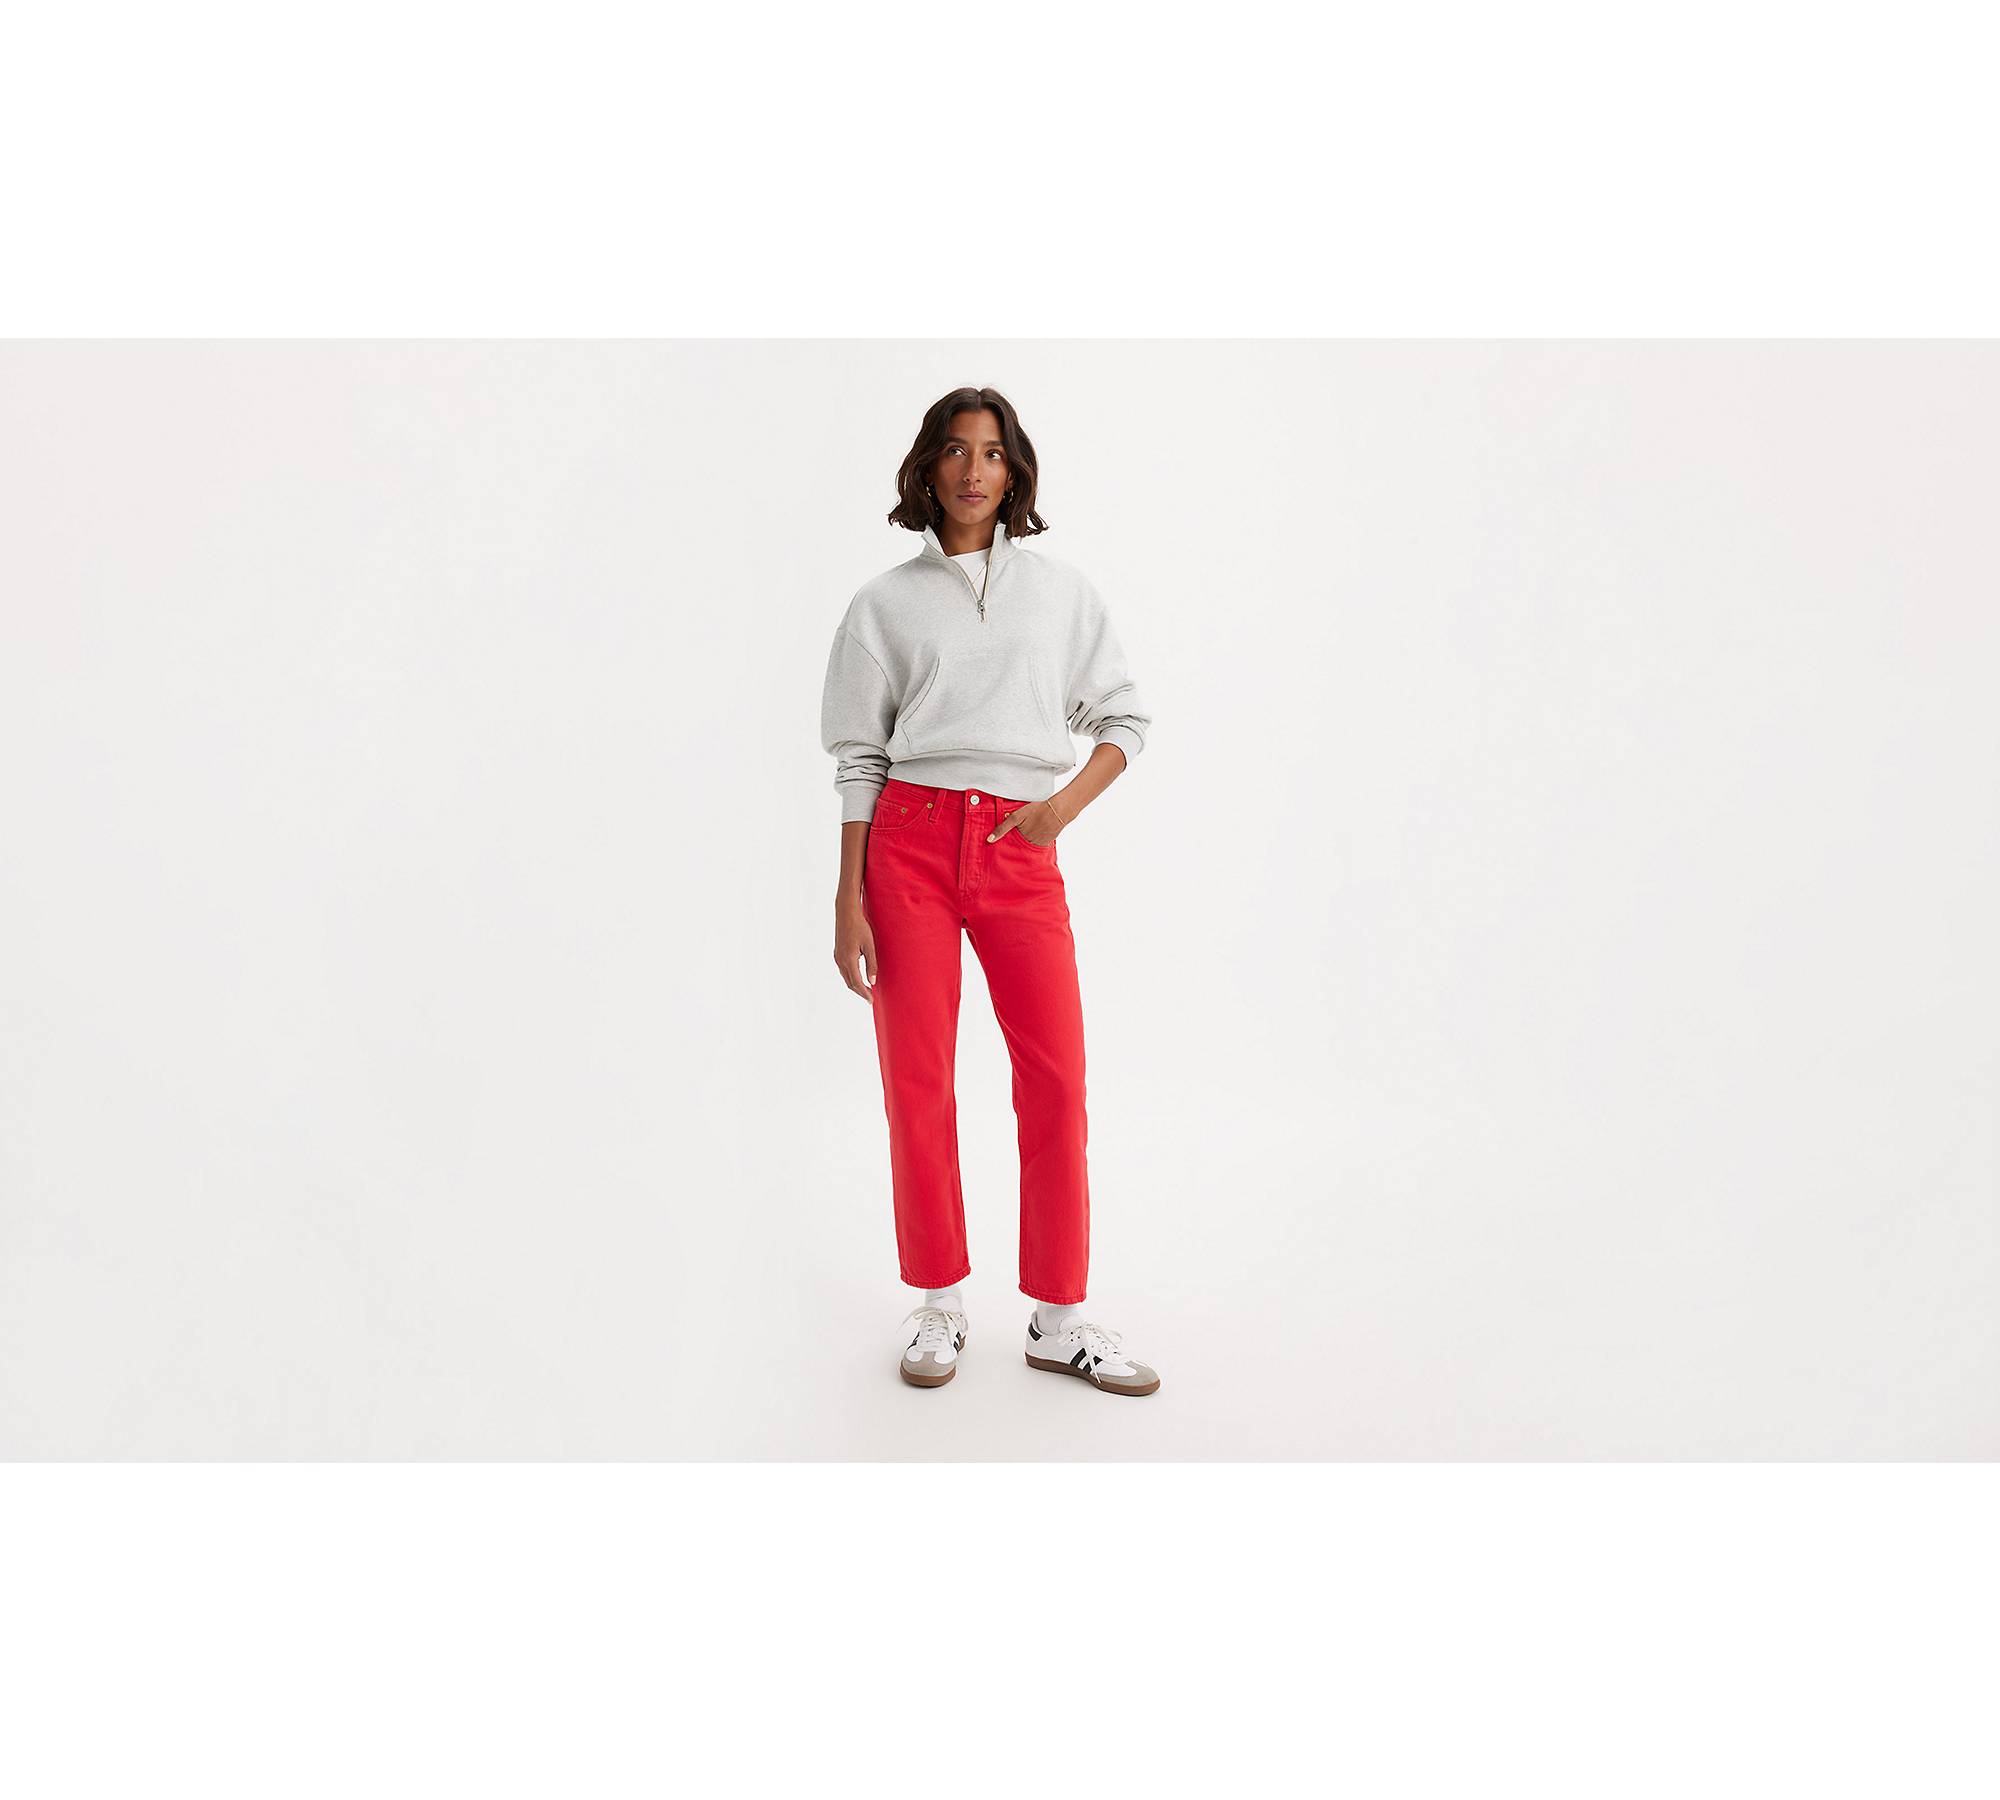 Levi's Original Red Tab Women's Classic Straight Fit Jeans 